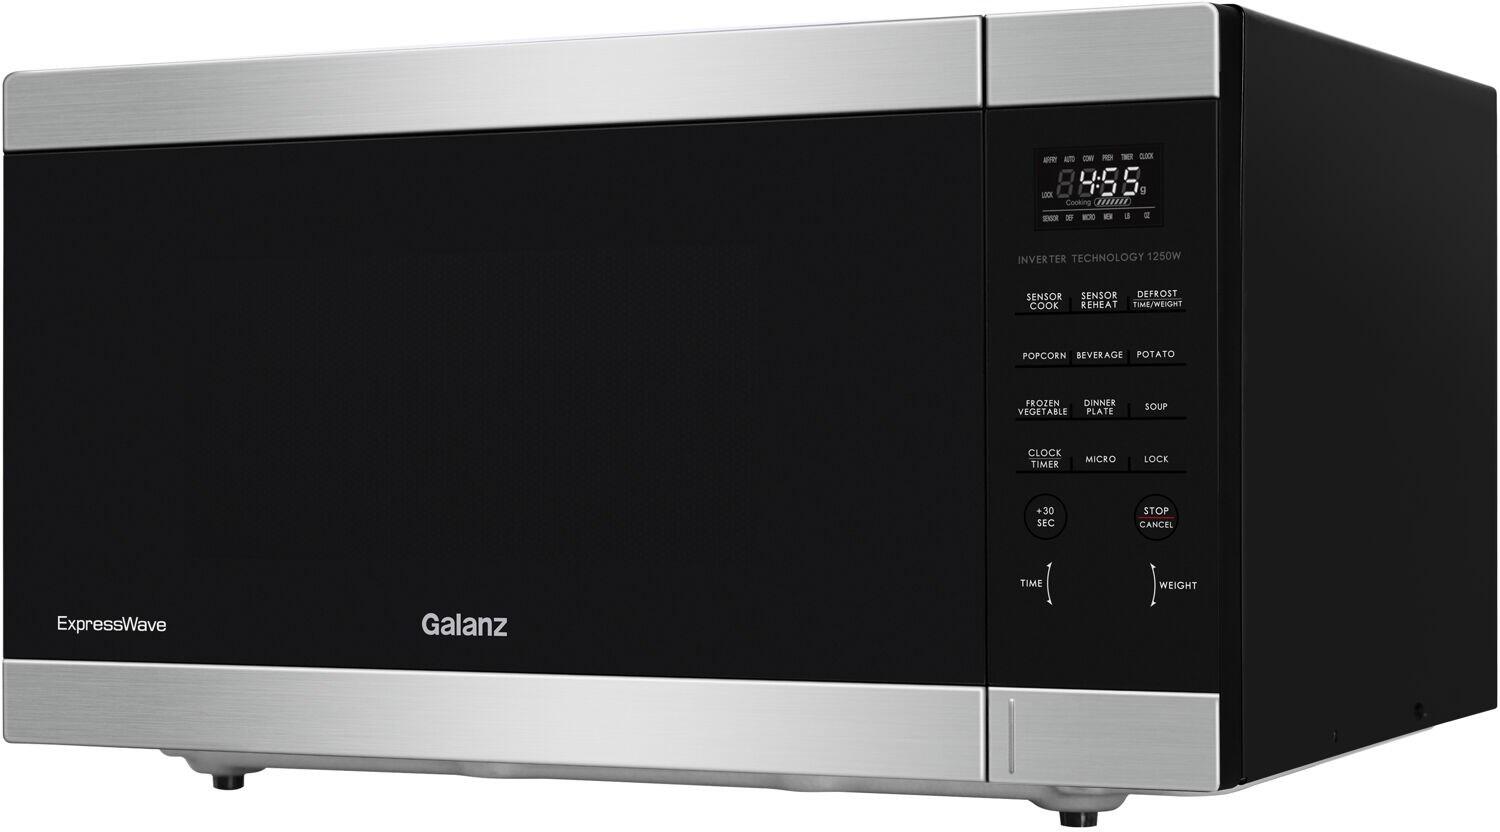 Galanz 2.2 Cu. Ft. ExpressWave Counter-top Microwave in Stainless Steel (GEWWD22S1SV125) 